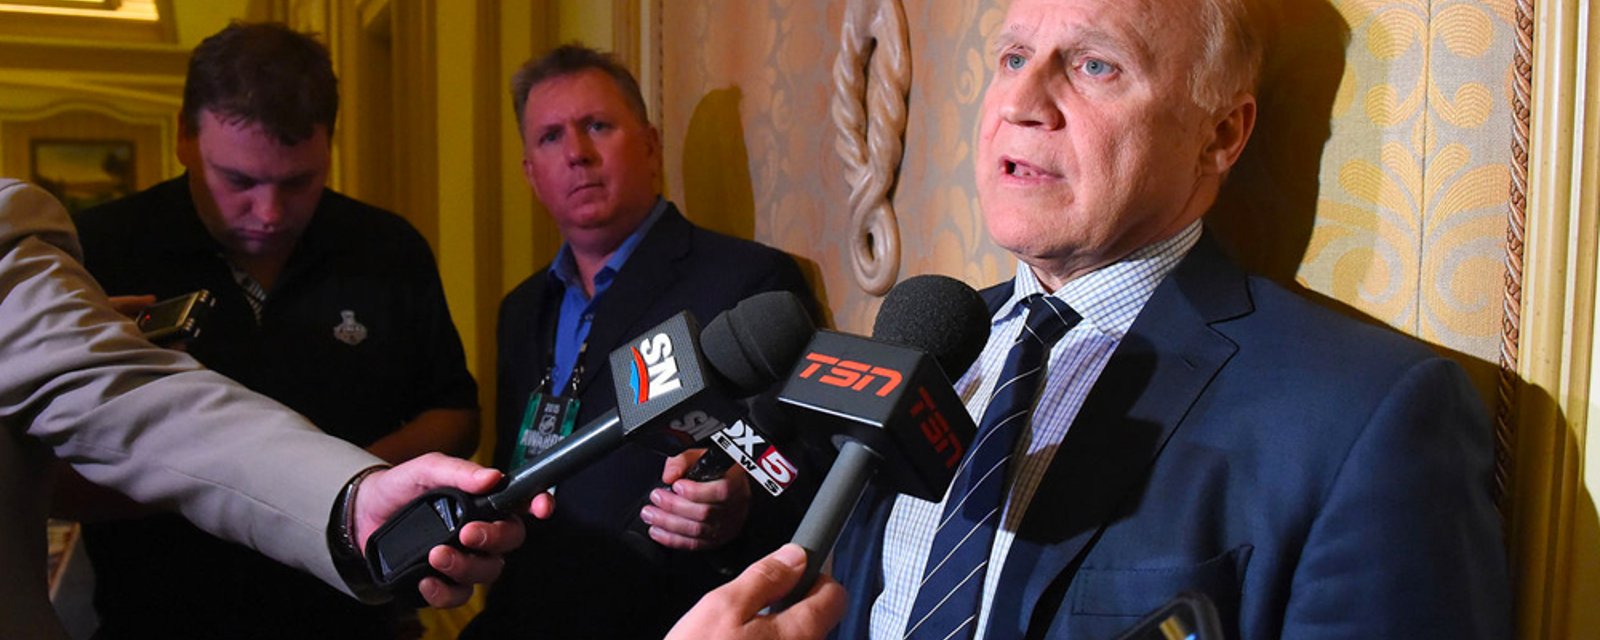 Colin Campbell admits to meddling in Hurricanes roster decisions and hockey fans are NOT happy